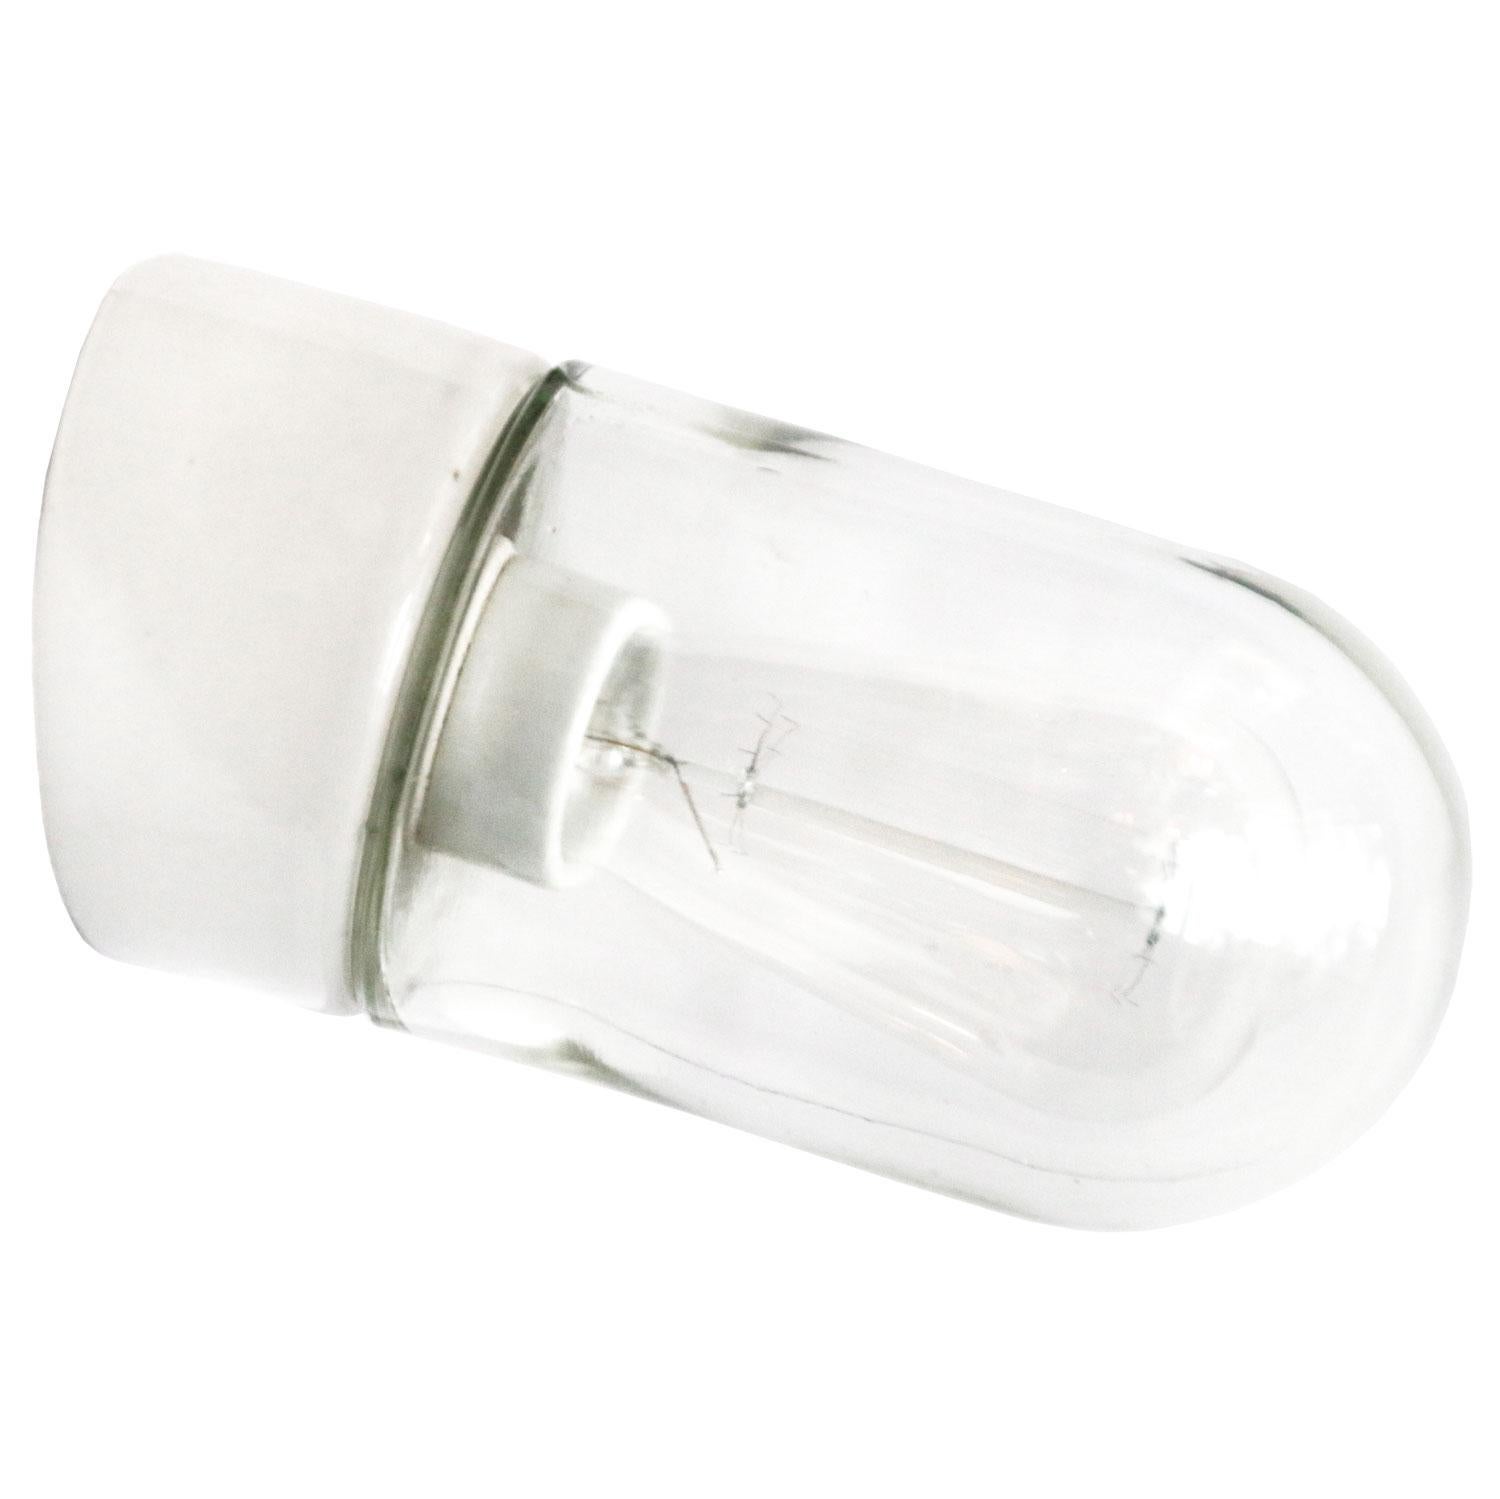 Industrial ceiling lamp. White porcelain. Clear glass.

2 conductors, no ground.
Measures: Diameter foot 10 cm
Suitable for 110 volt USA
new wiring is CE certified (220 volt)  or UL Listed (110 volt) 

Measure: Weight: 0.9 kg / 2 lb

Priced per